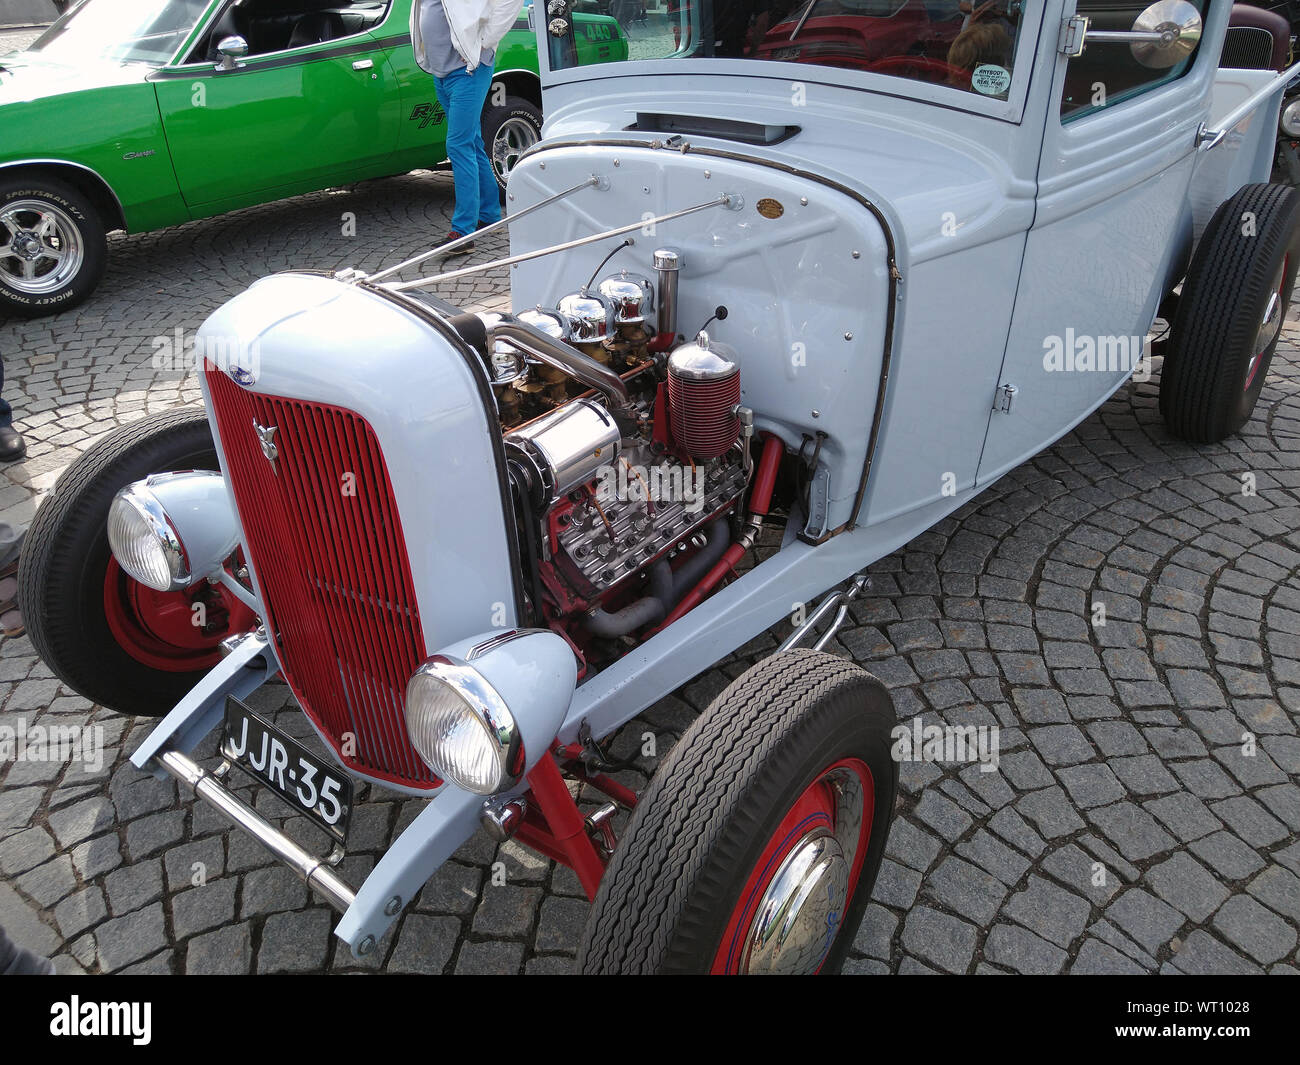 Tampere, Finland - August 31, 2019: People looking old cars at the Mansen Mäntä Messut (Tampere piston fair in English). Stock Photo